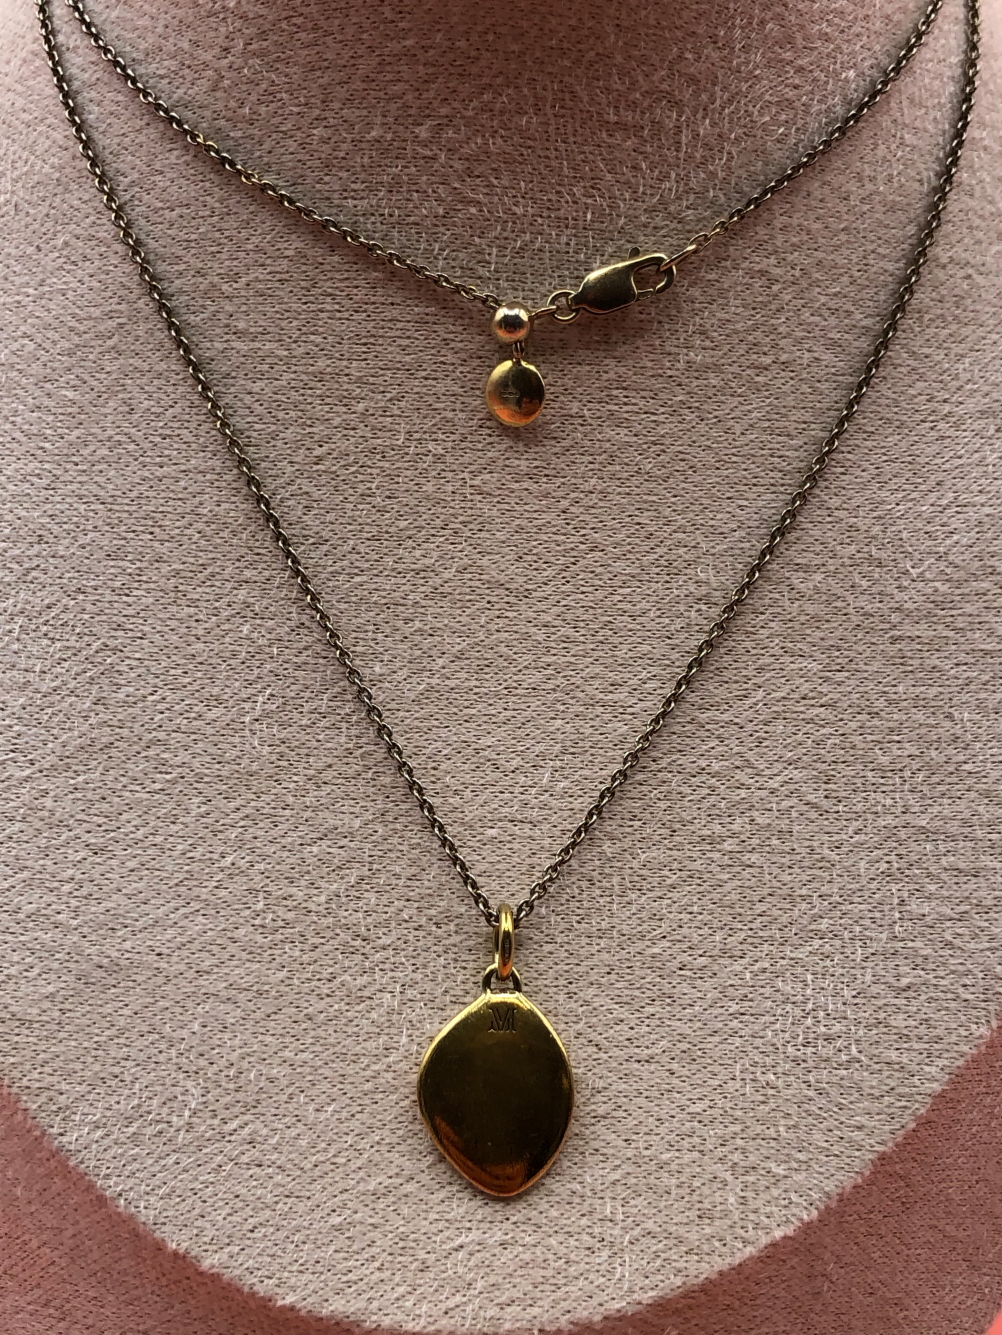 A MONICA VINADER SIREN TEARDROP PENDANT AND CHAIN TOGETHER WITH A MEJURI BLACK ONYX AND SILVER - Image 3 of 8